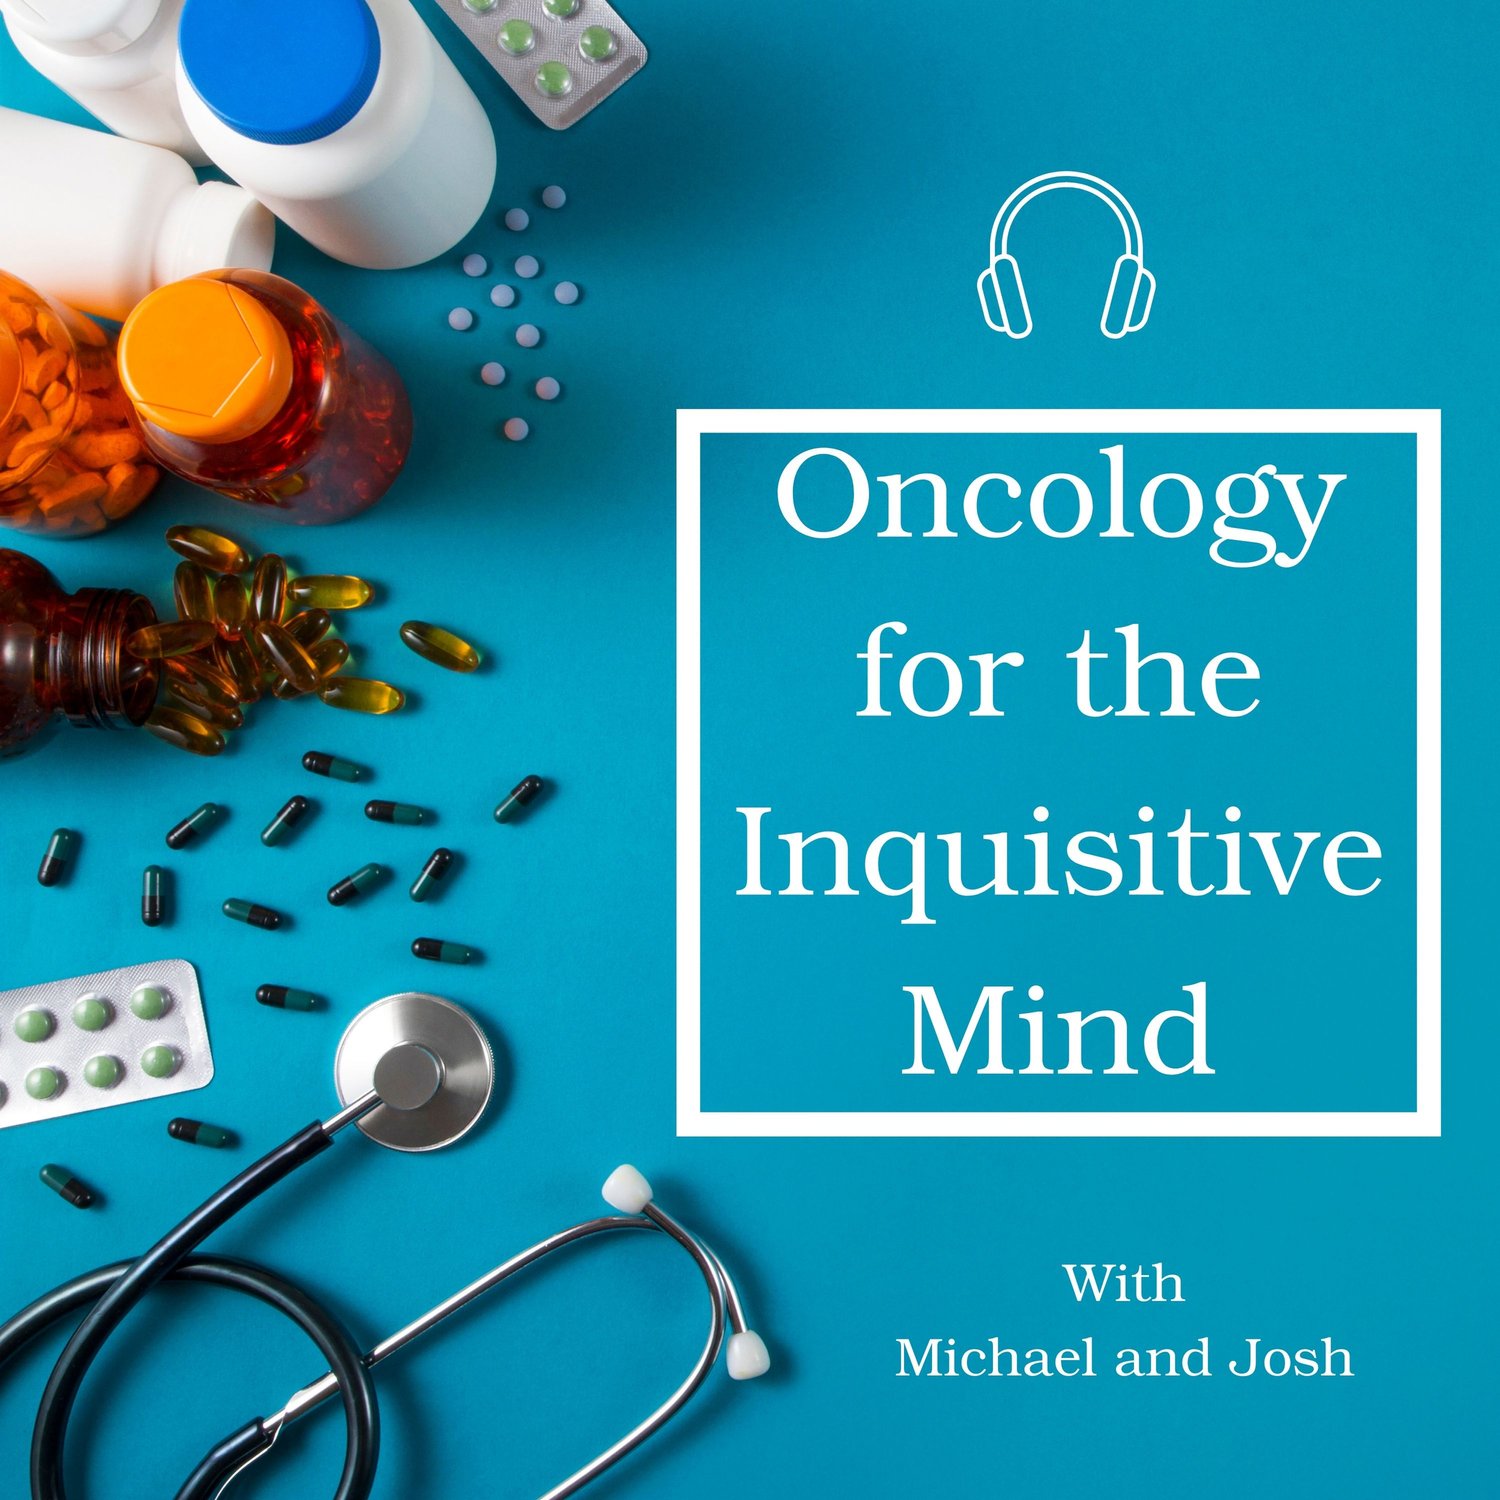 Oncology for the Inquisitive Mind